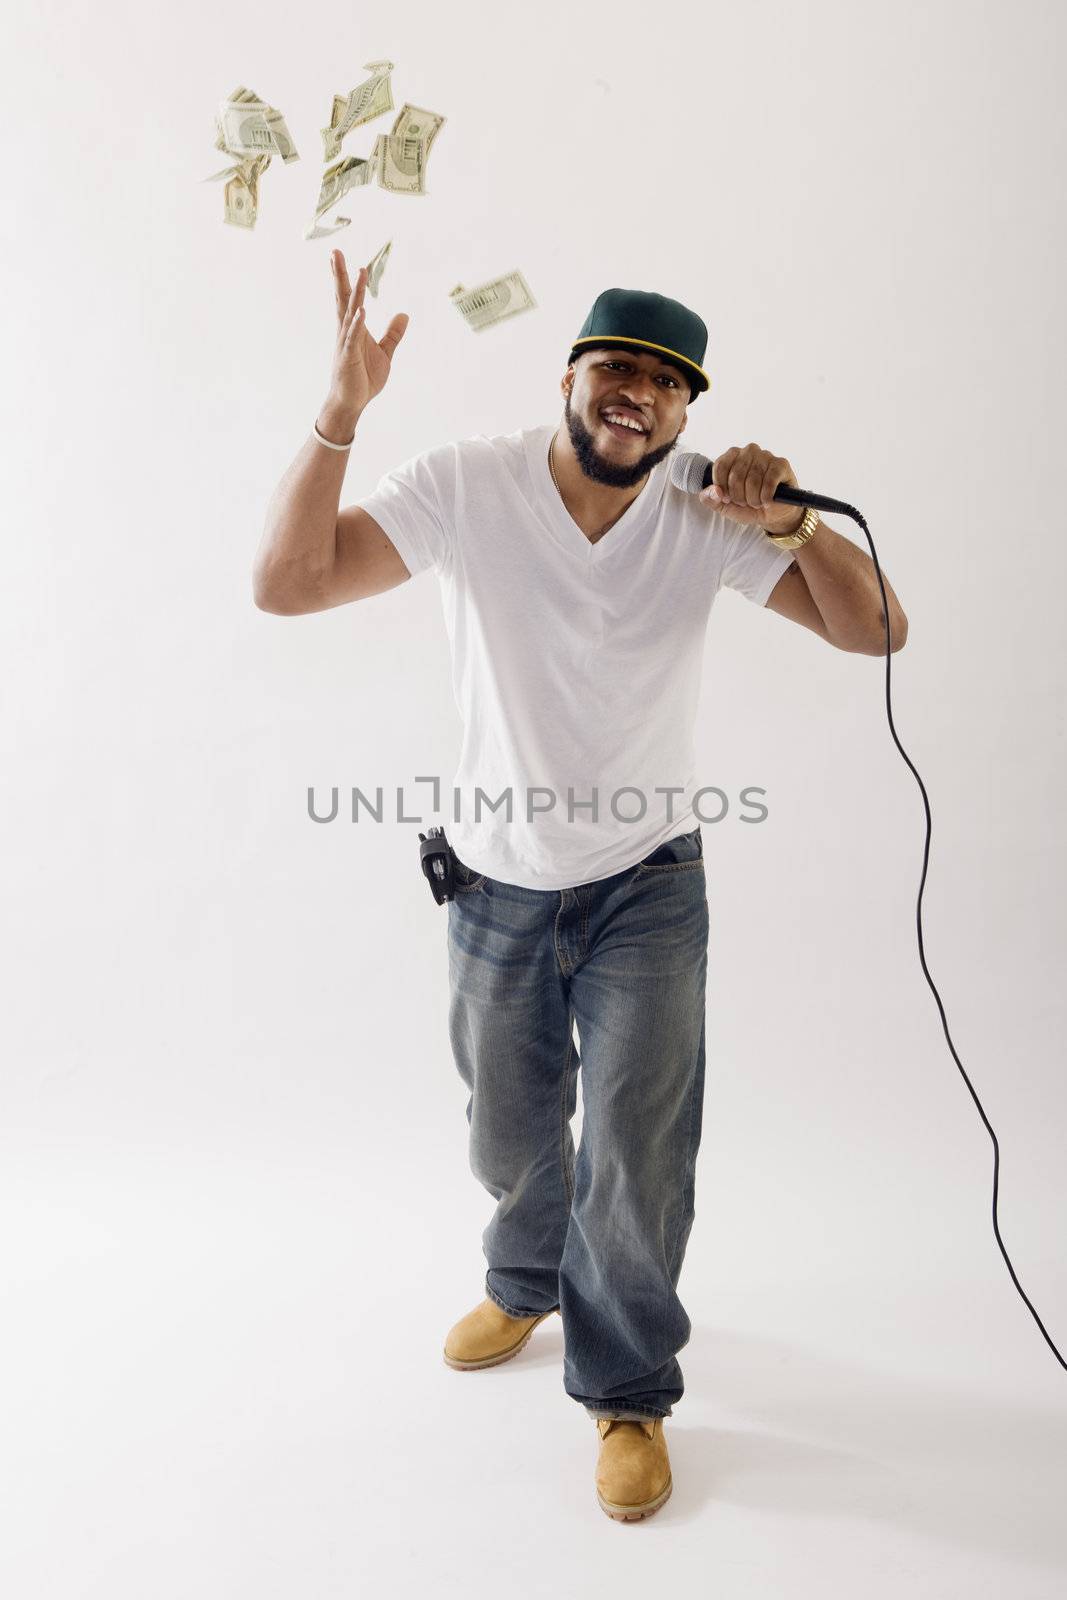 Black vocalist singing into microphone tossing money in the air